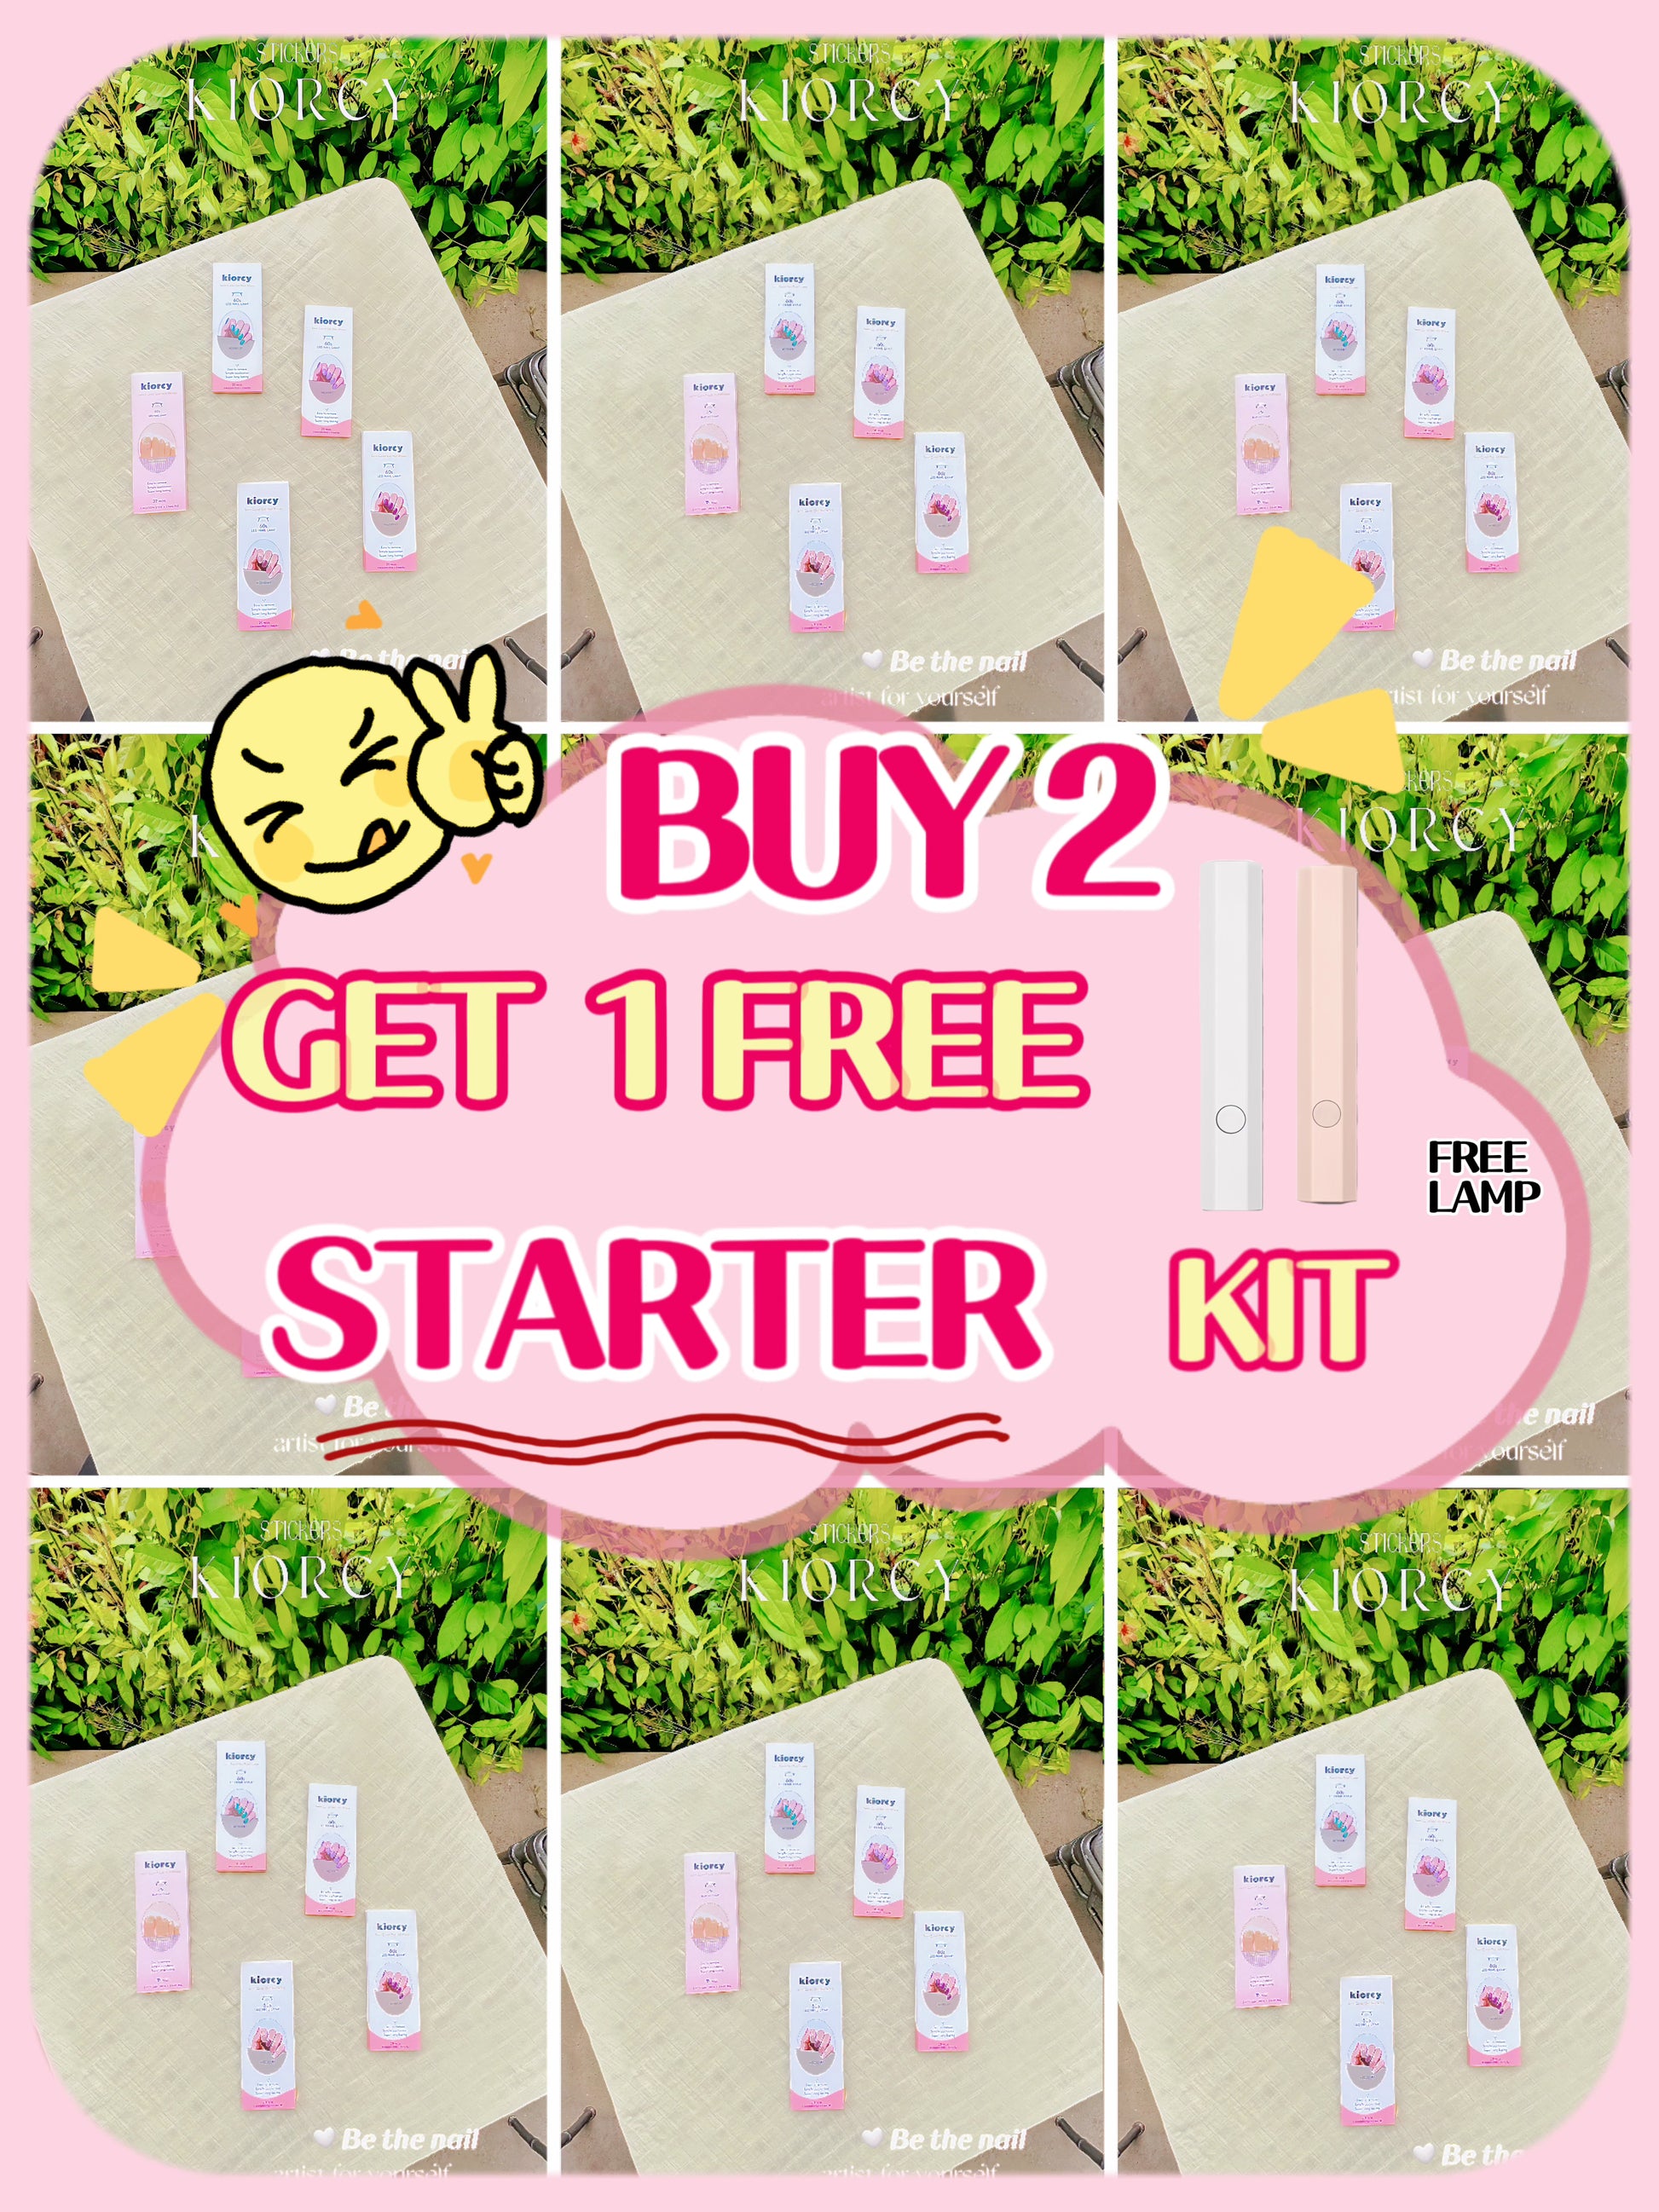 Starter kit, 1 month trial subscription